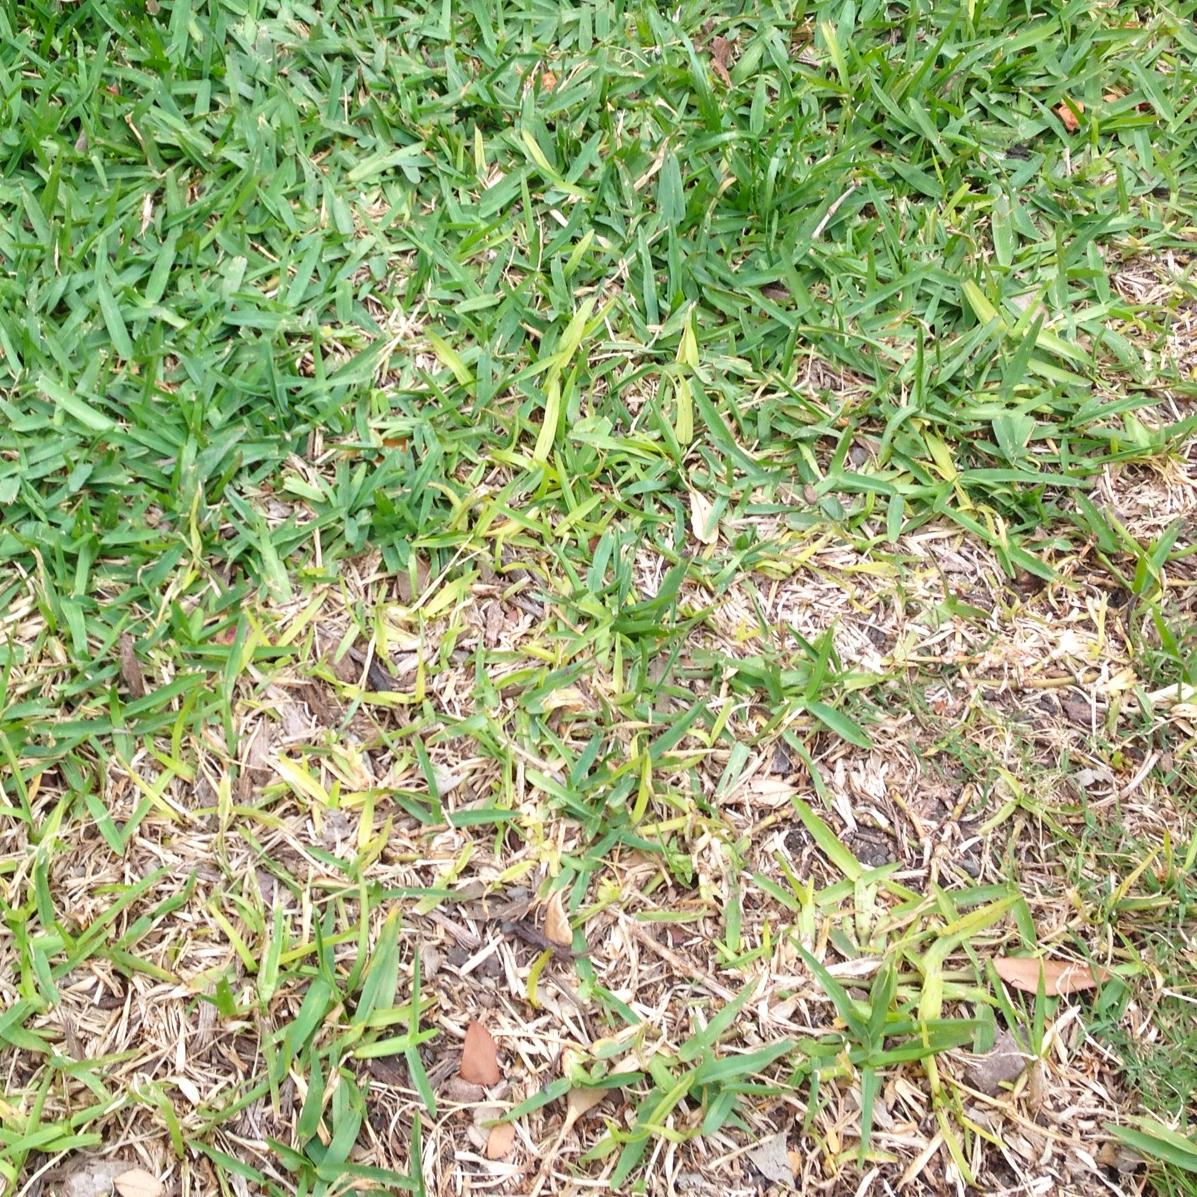 Neil Sperry Take All Root Rot Remains A Problem For San Antonio Lawns